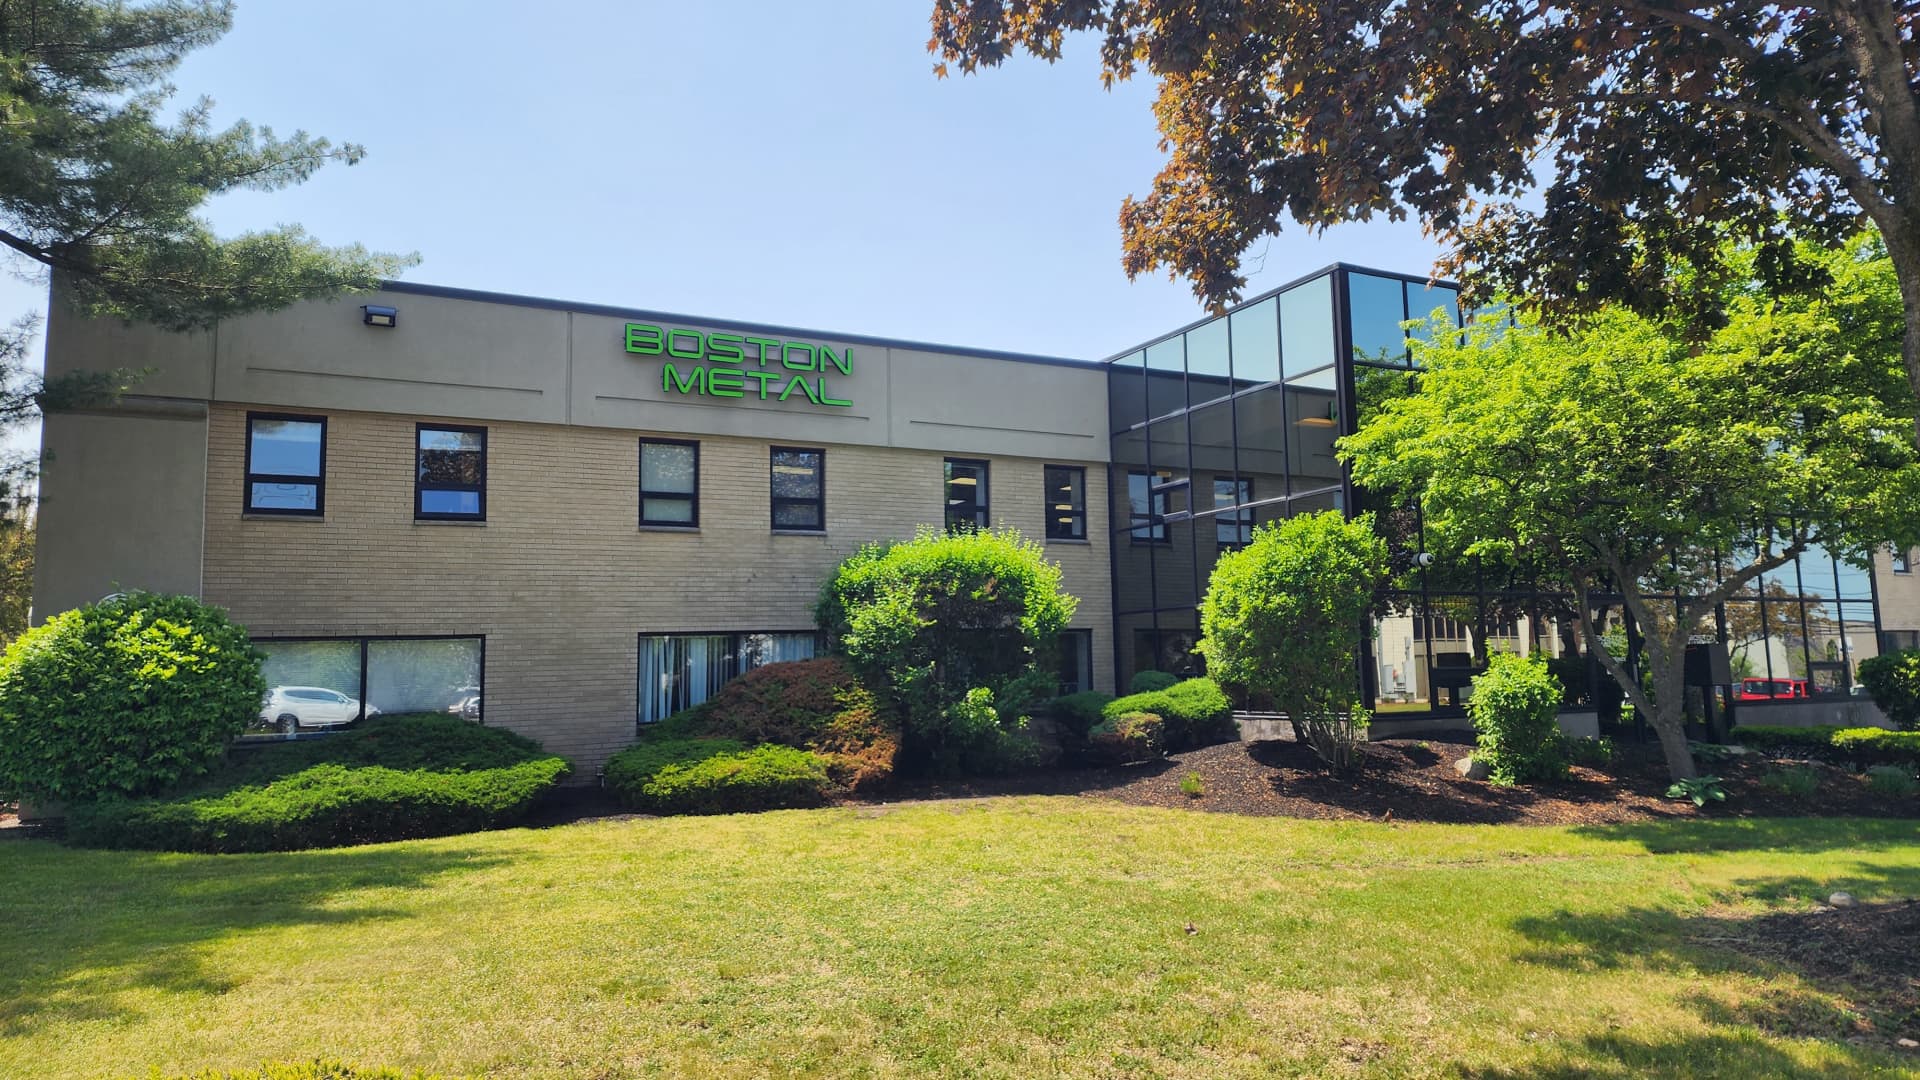 The Boston Metal offices in Woburn, Mass.